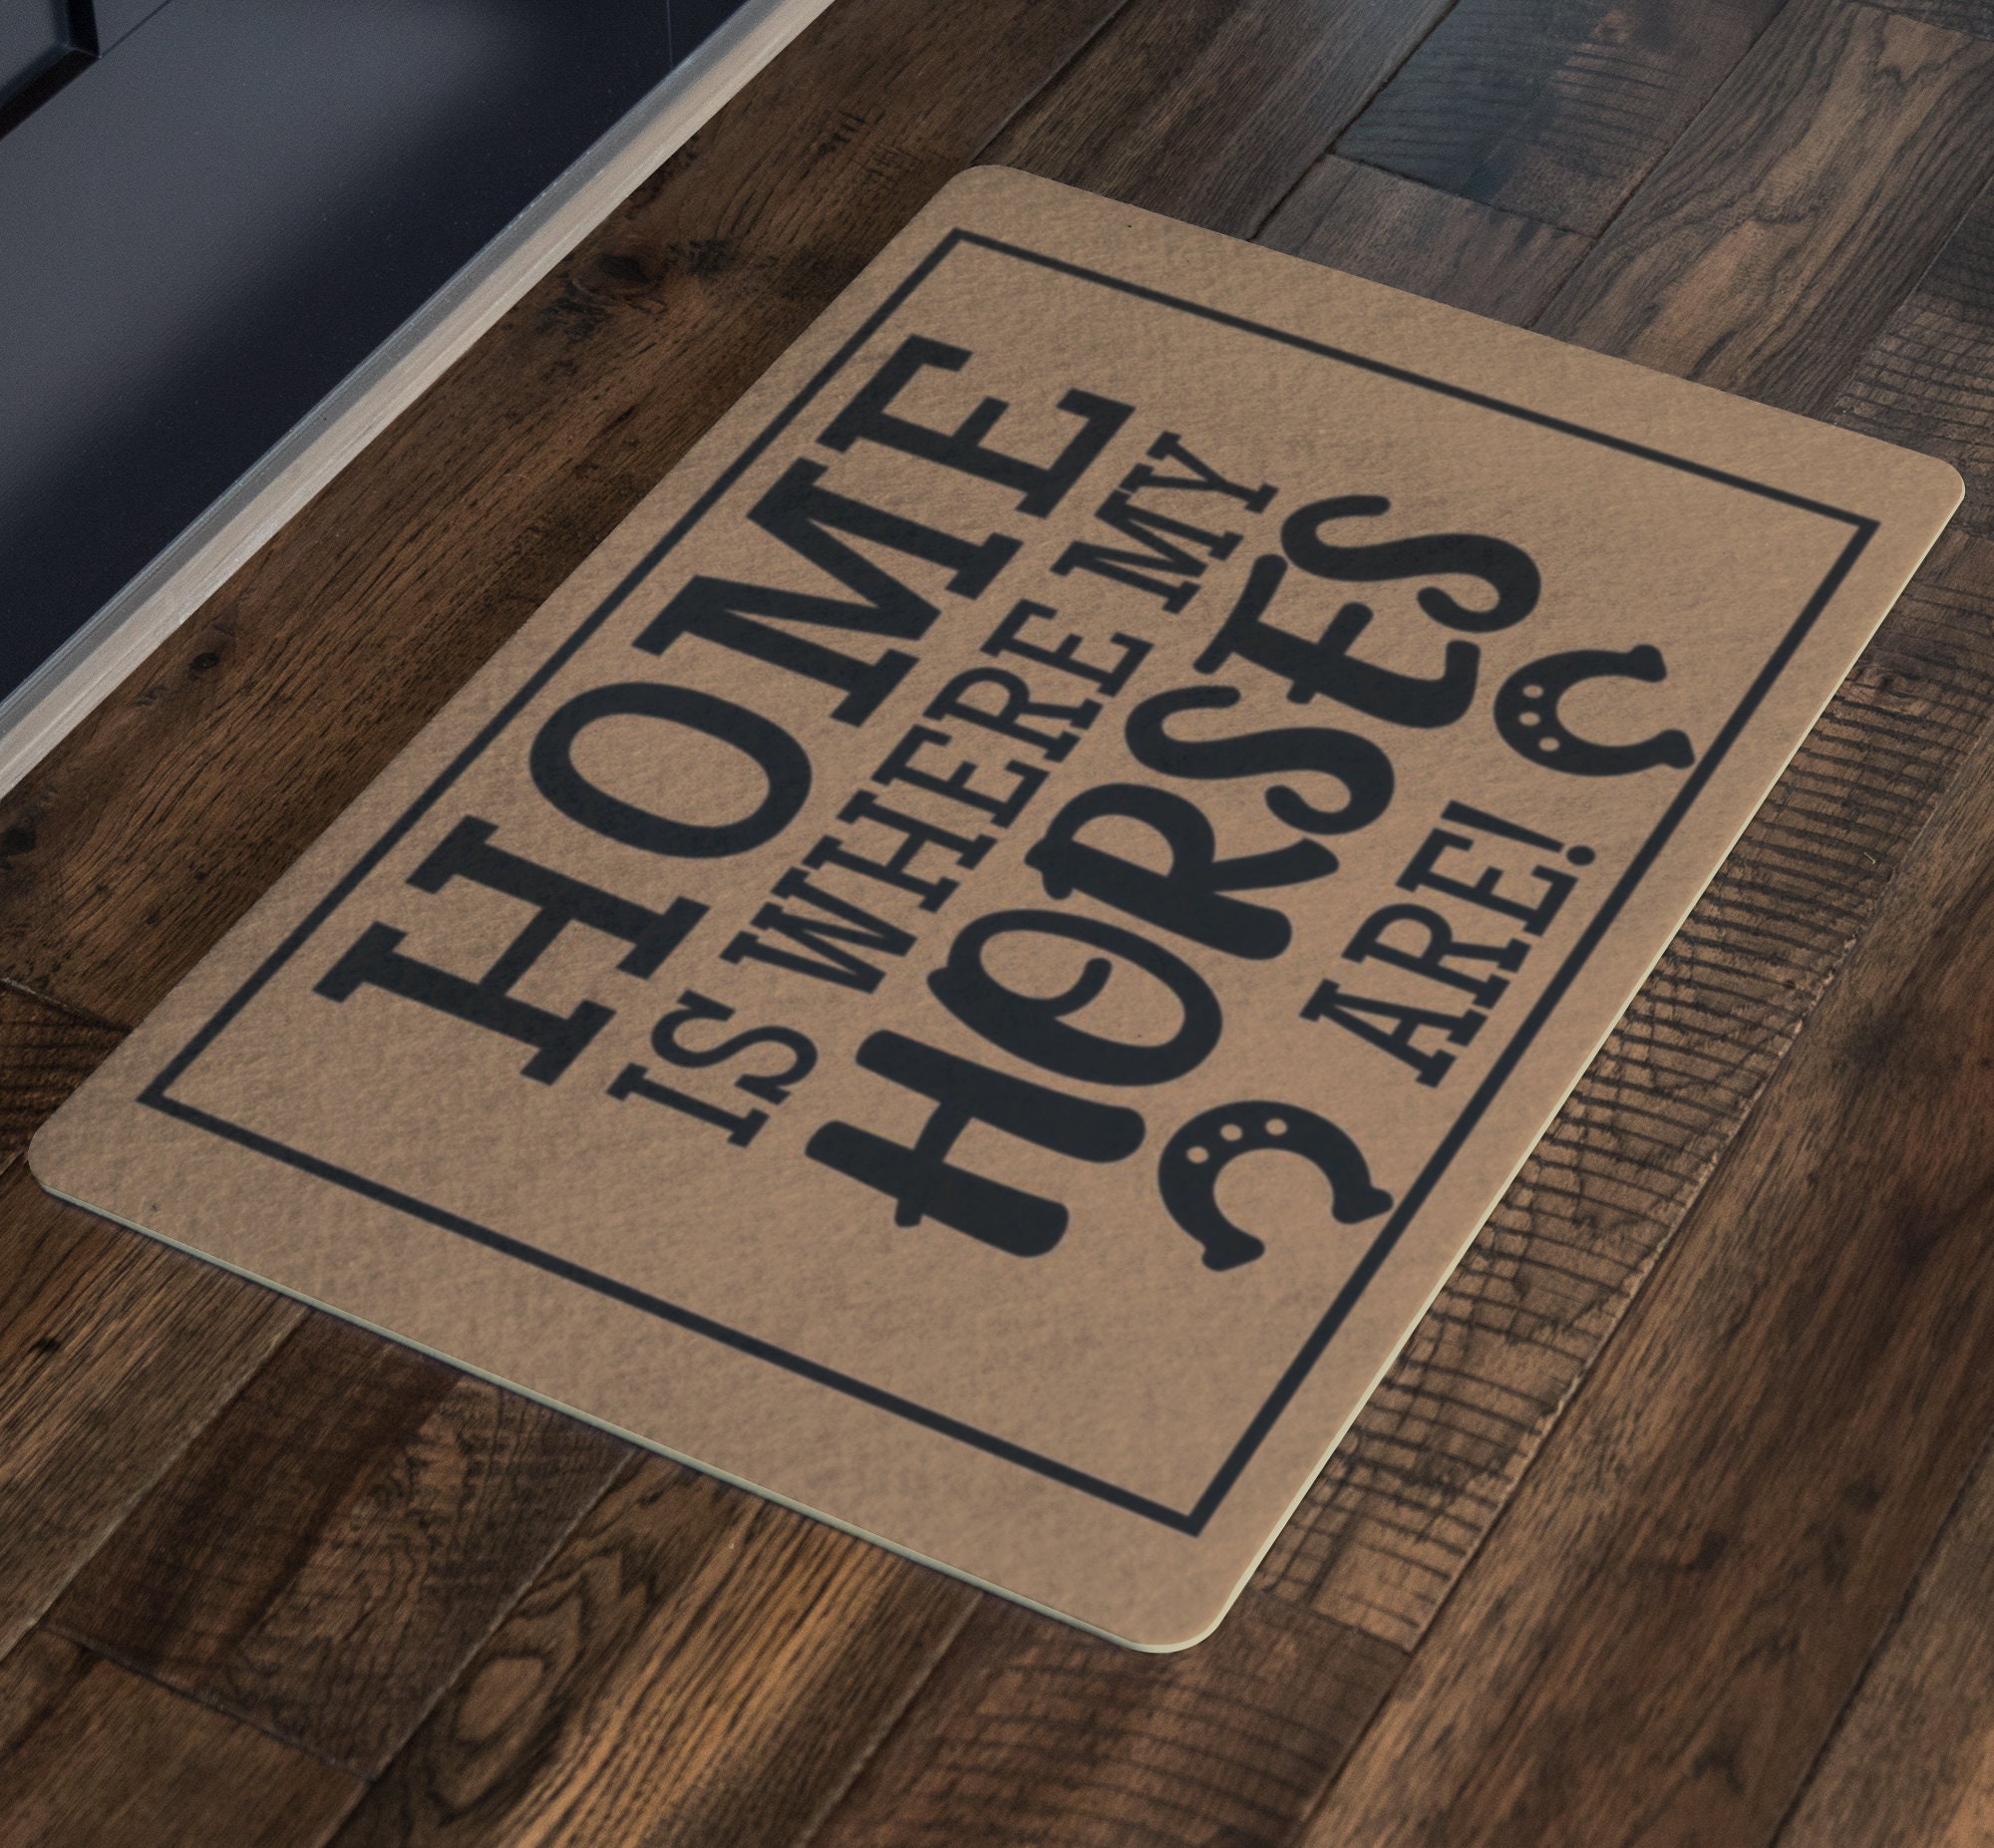 Home is Where My Horses Are Doormat - Horse Doormat, Horse Lover Gift, New Home Gift, Housewarming Gift, Horse Door Mat, Horse Decor